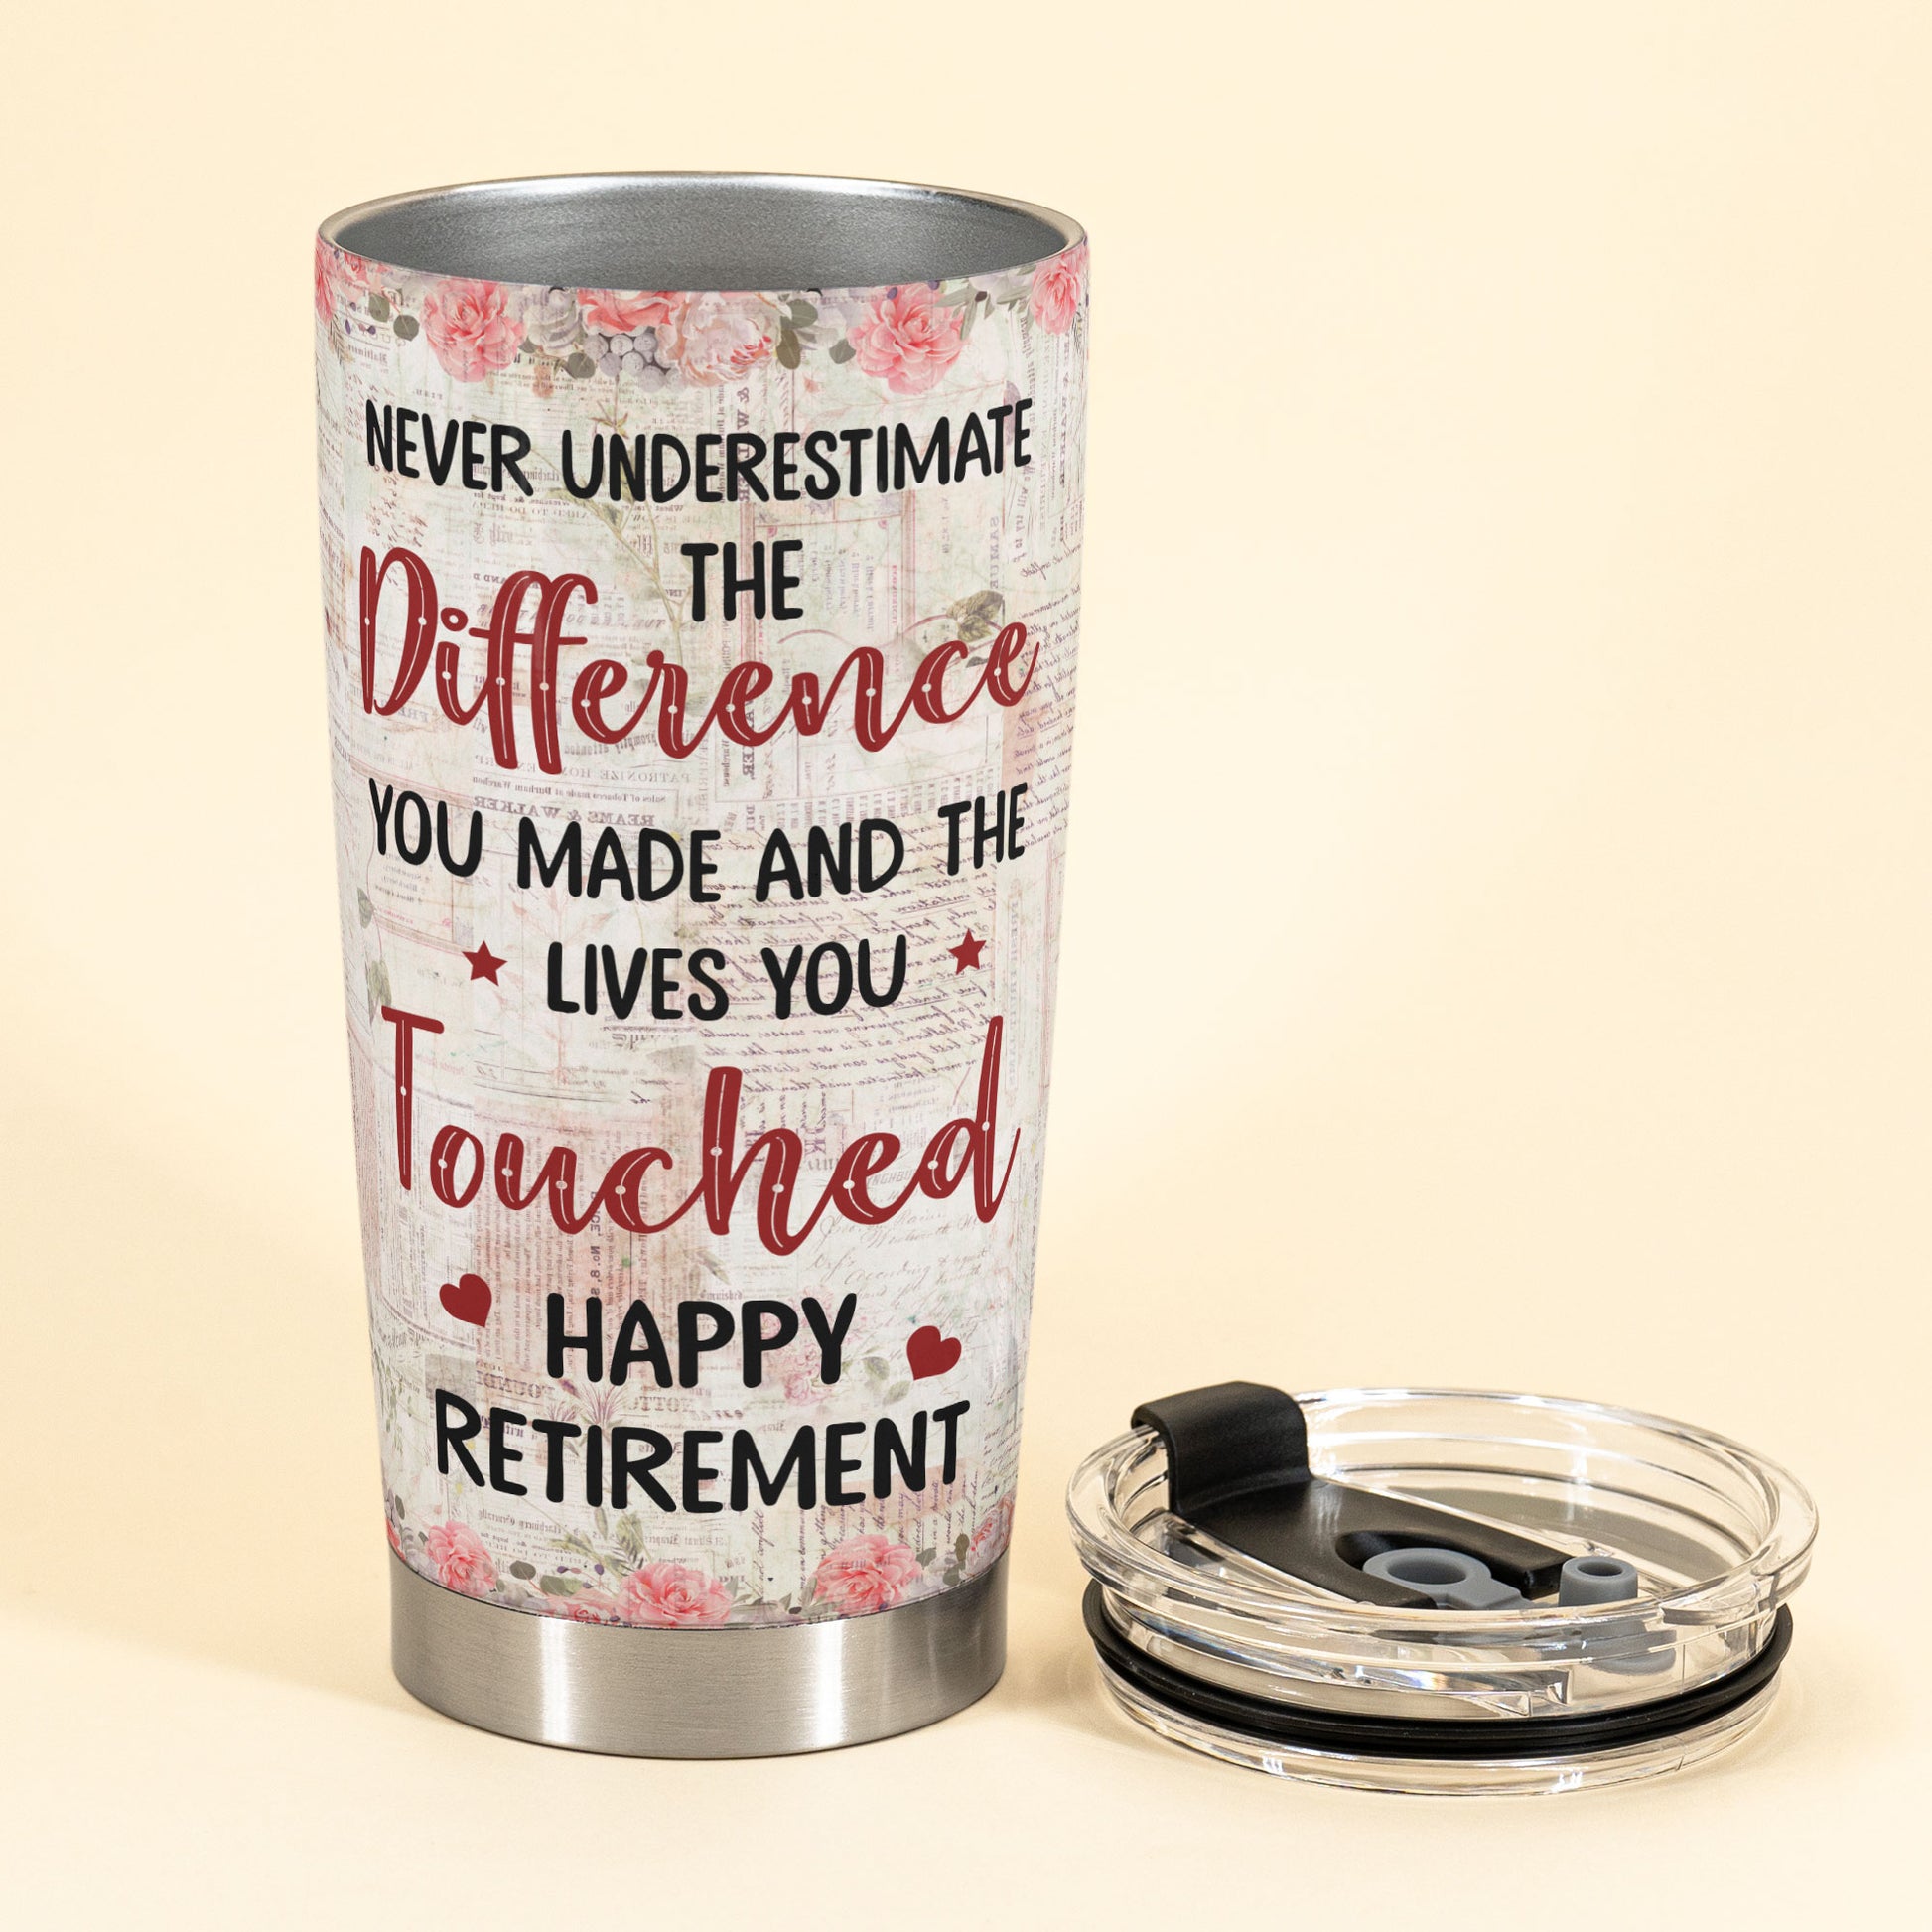 Happy Retirement To The Best Teacher Ever - Personalized Tumbler Cup - Retirement, Leave Work, Year End Gift For Teachers, Old Teachers, School Workers, Education Workers